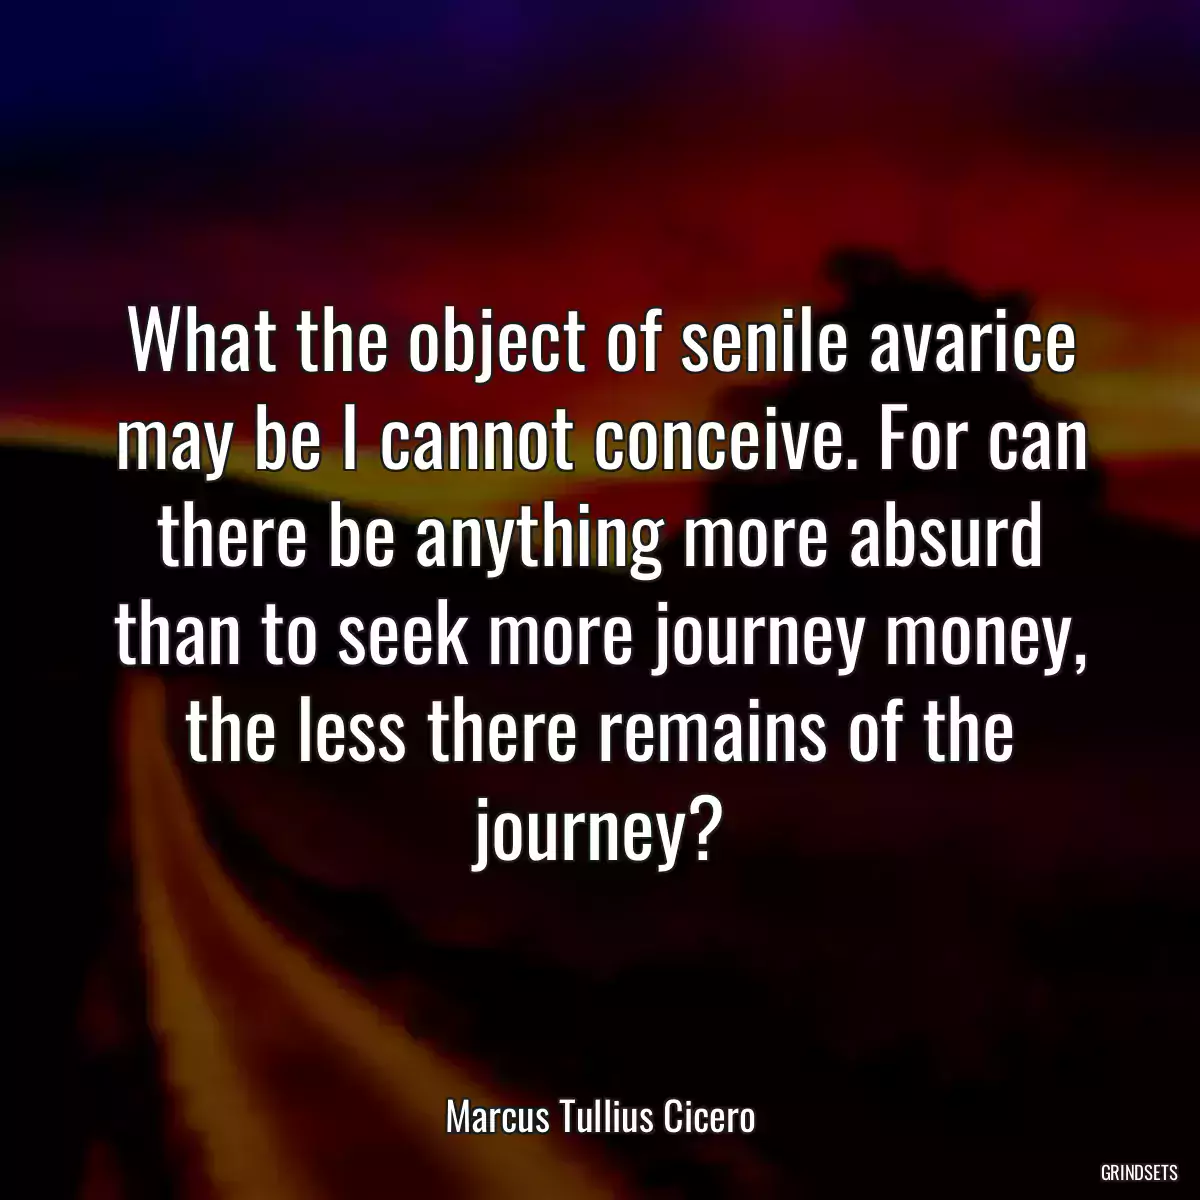 What the object of senile avarice may be I cannot conceive. For can there be anything more absurd than to seek more journey money, the less there remains of the journey?